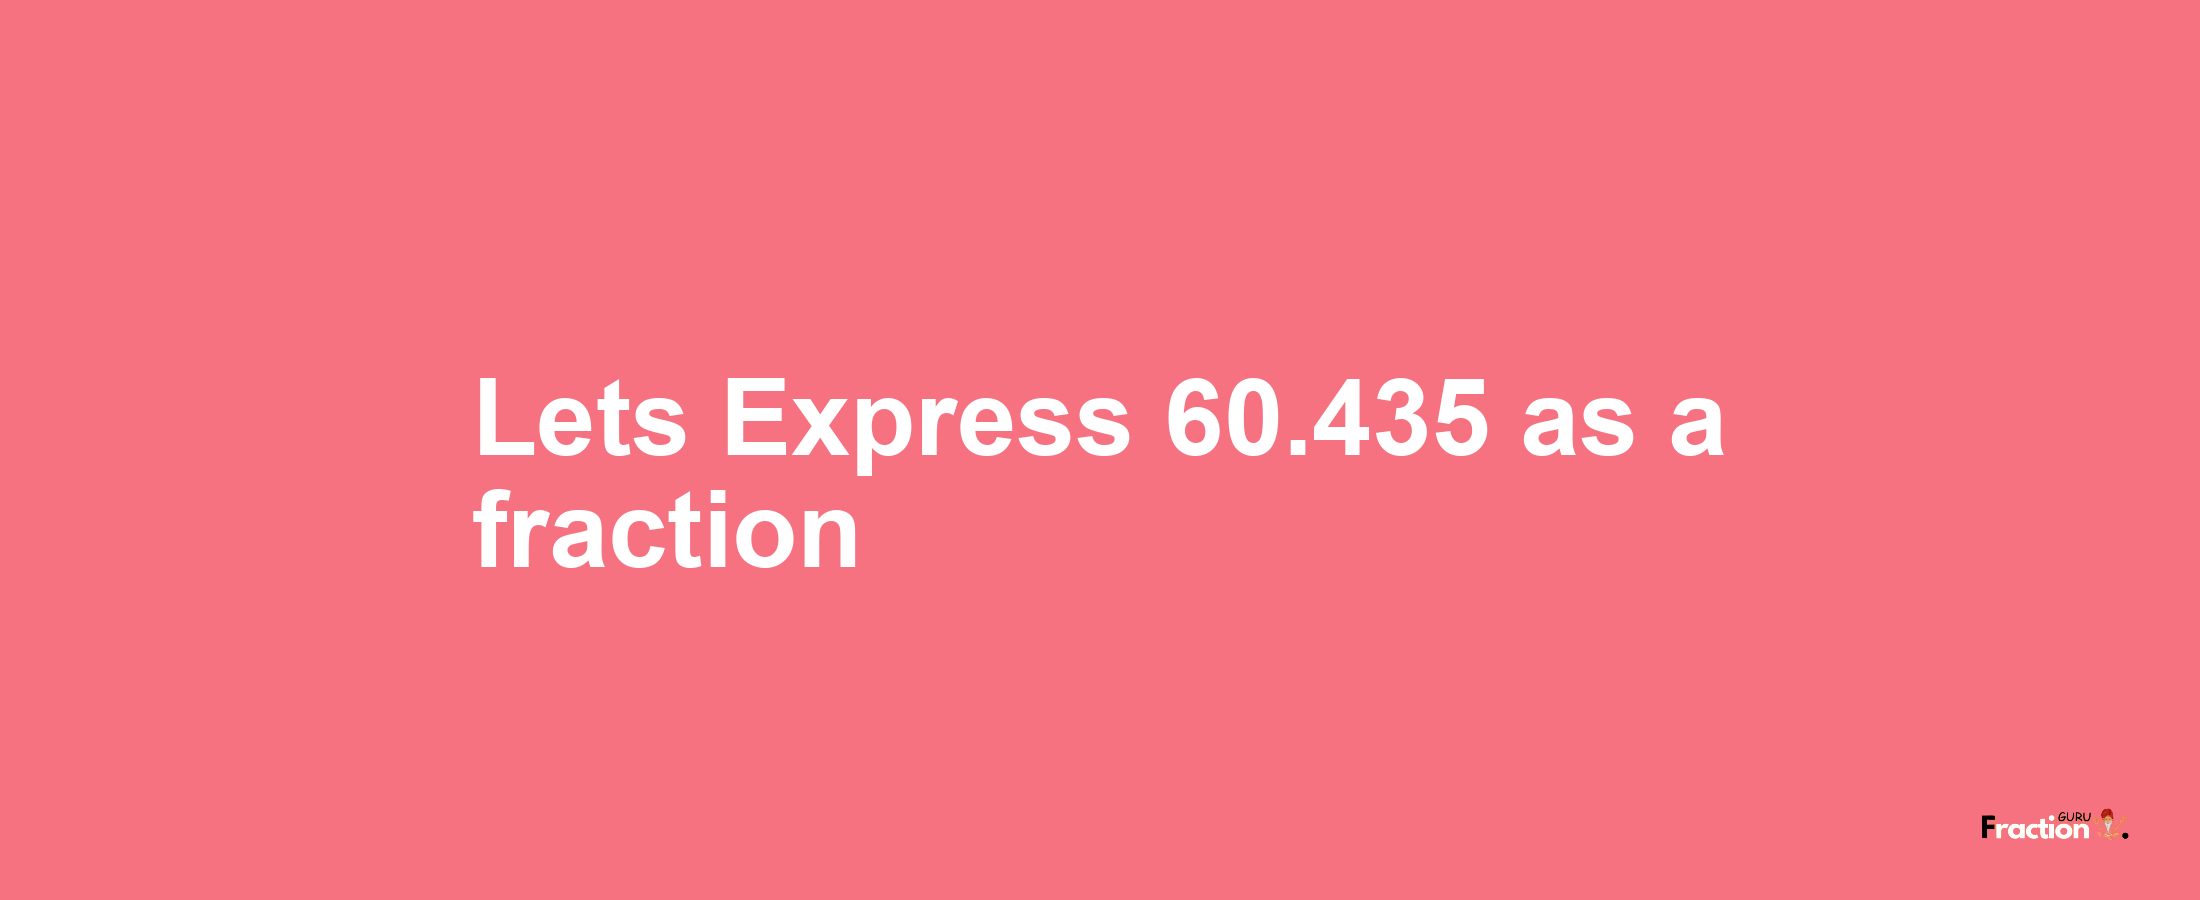 Lets Express 60.435 as afraction